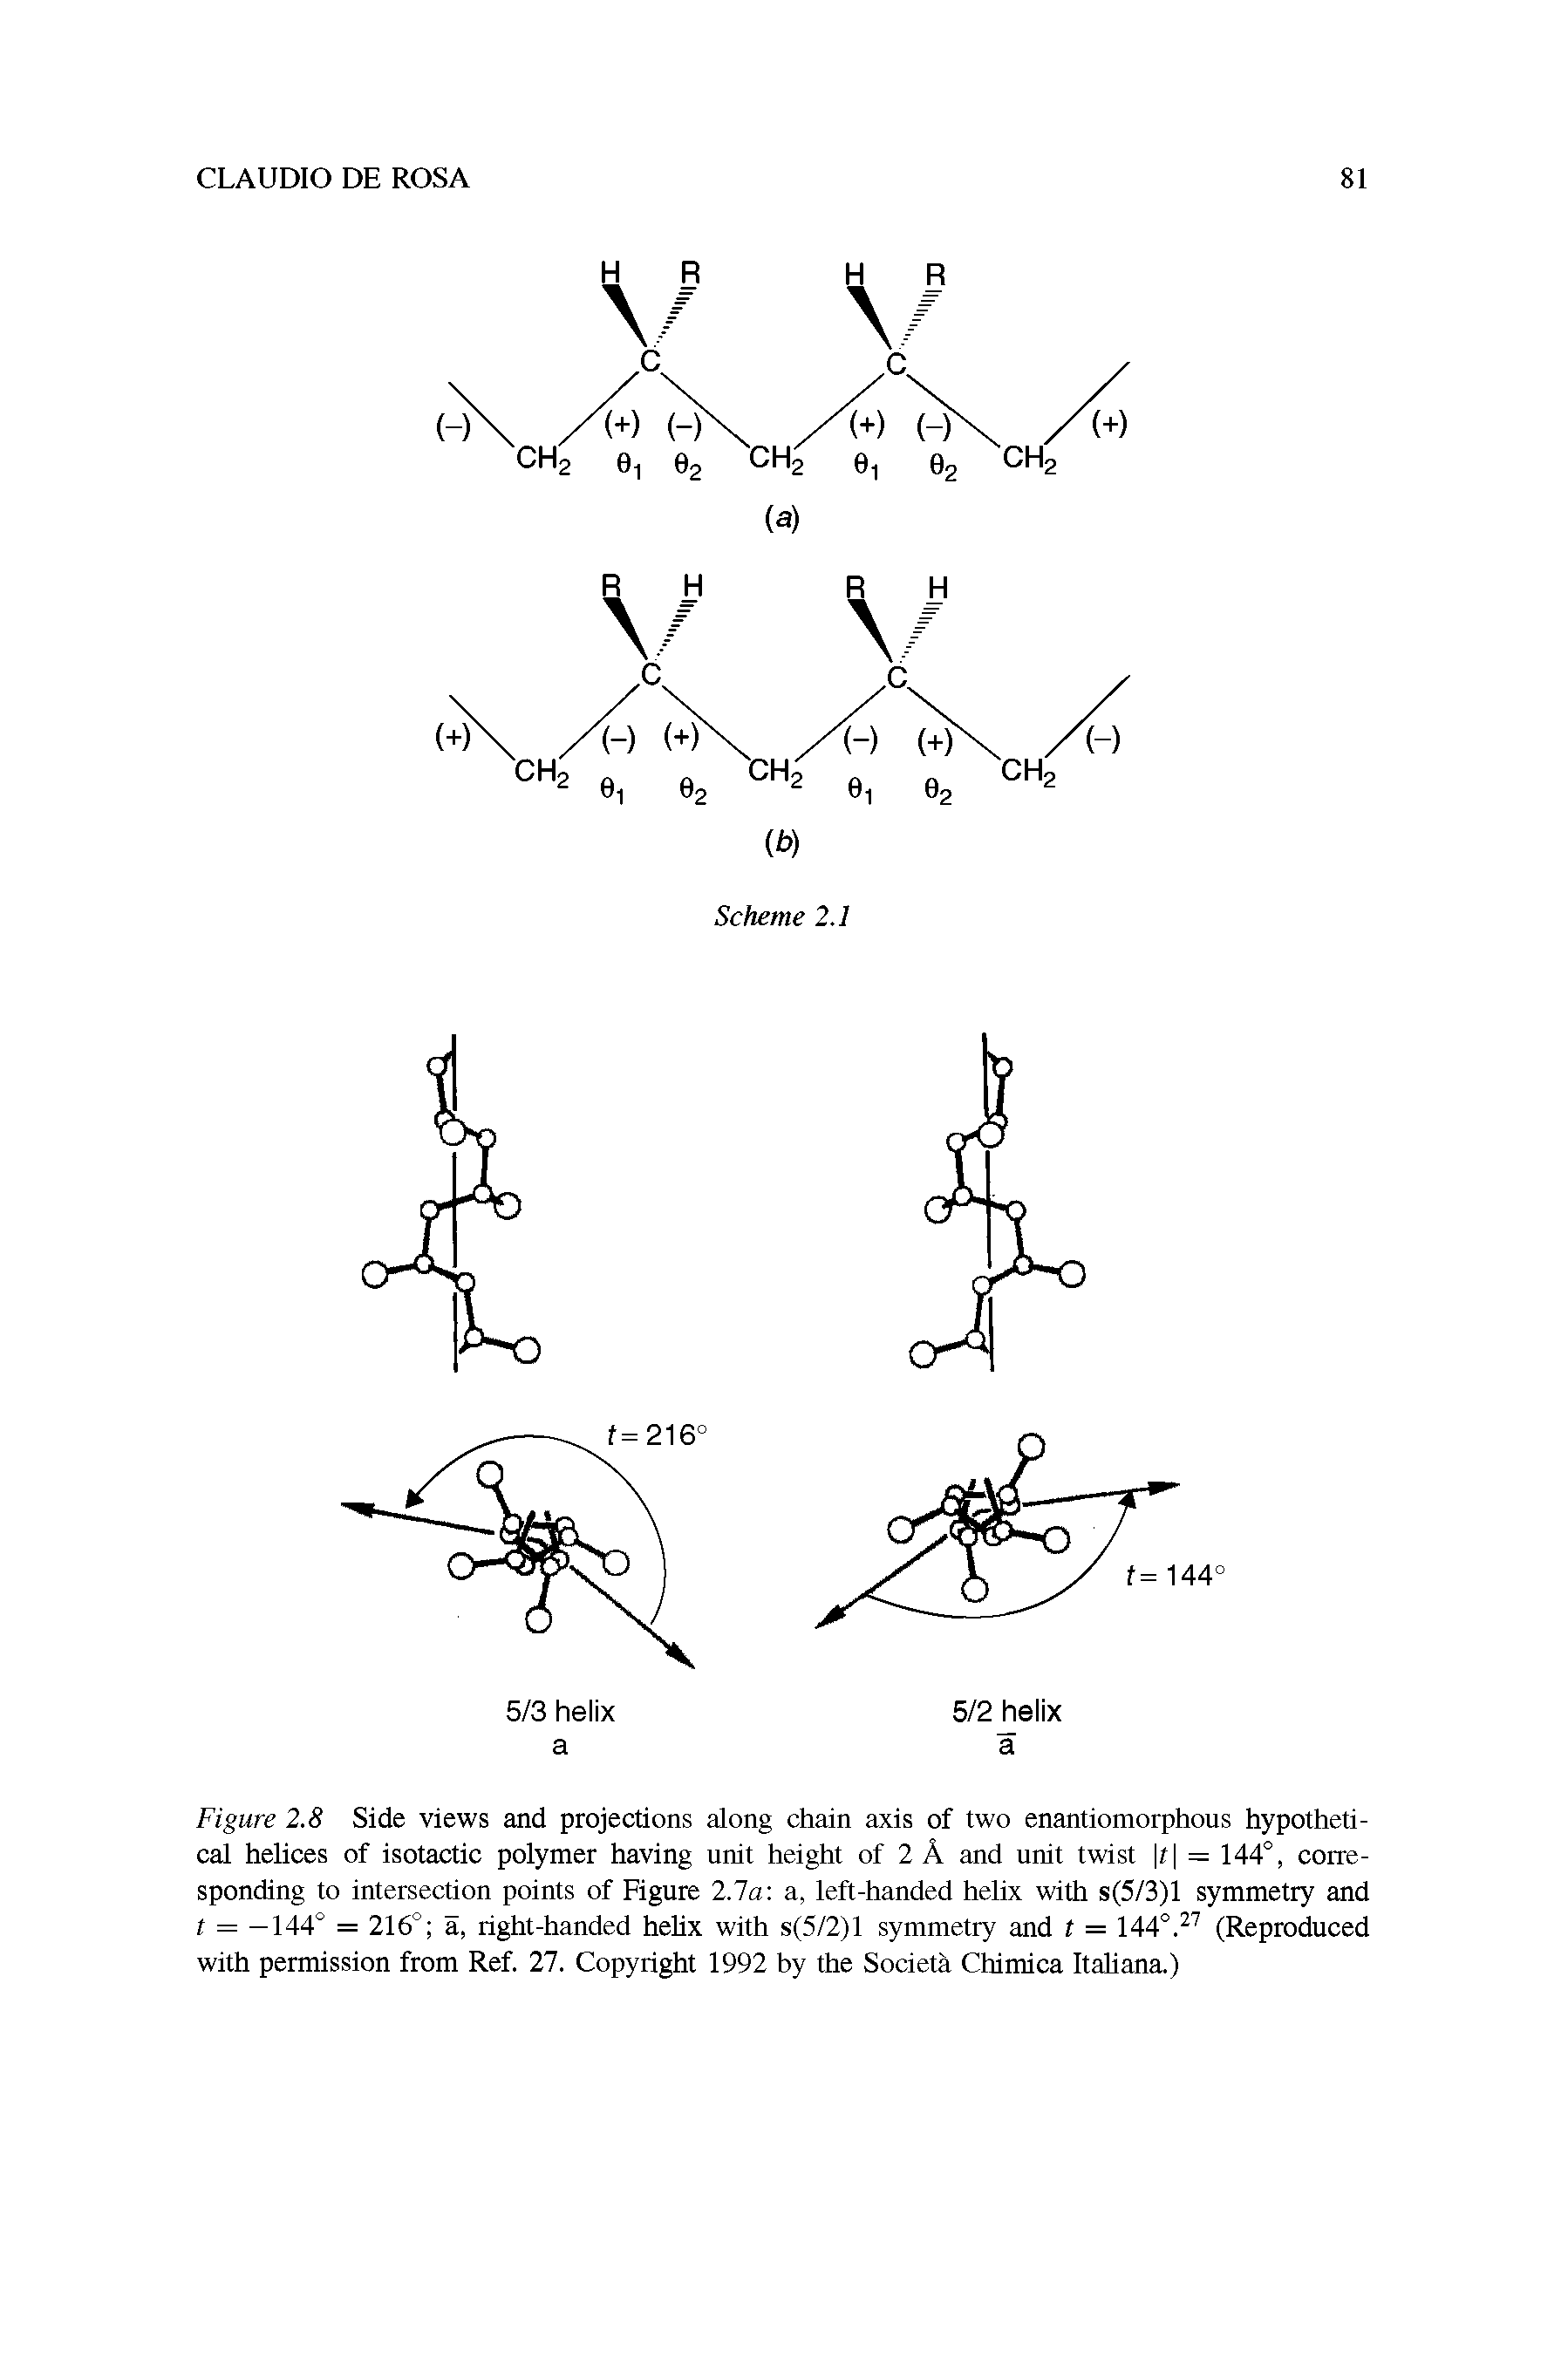 Figure 2.8 Side views and projections along chain axis of two enantiomorphous hypothetical helices of isotactic polymer having unit height of 2 A and unit twist t = 144°, corresponding to intersection points of Figure 2.7a a, left-handed helix with s(5/3)l symmetry and t = —144° = 216° a, right-handed helix with s(5/2)l symmetry and t = 144°.27 (Reproduced with permission from Ref. 27. Copyright 1992 by the Societa Chimica Italiana.)...